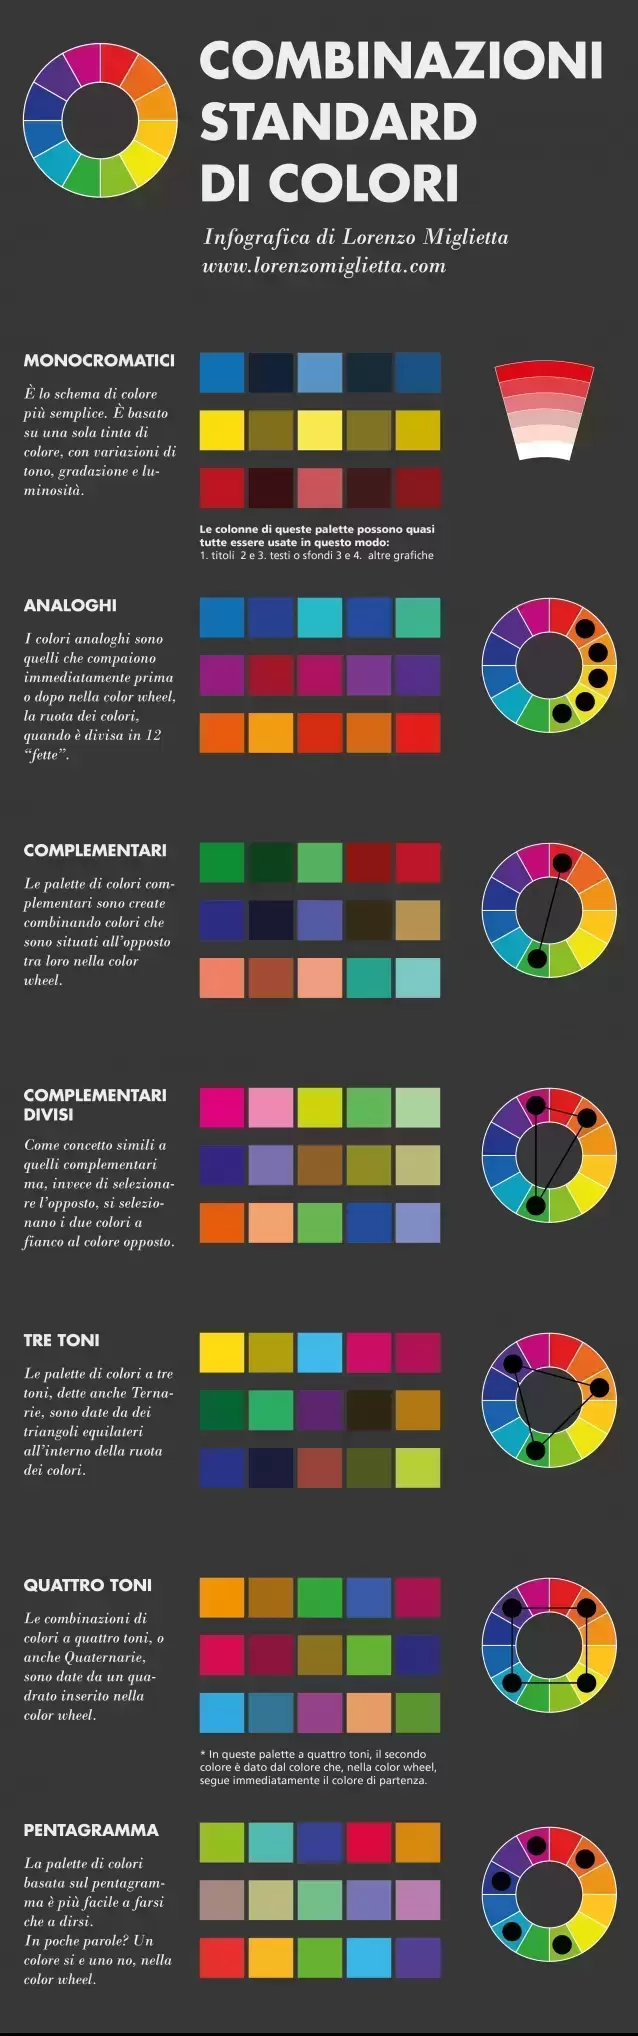 Infographic color2i standard combinations